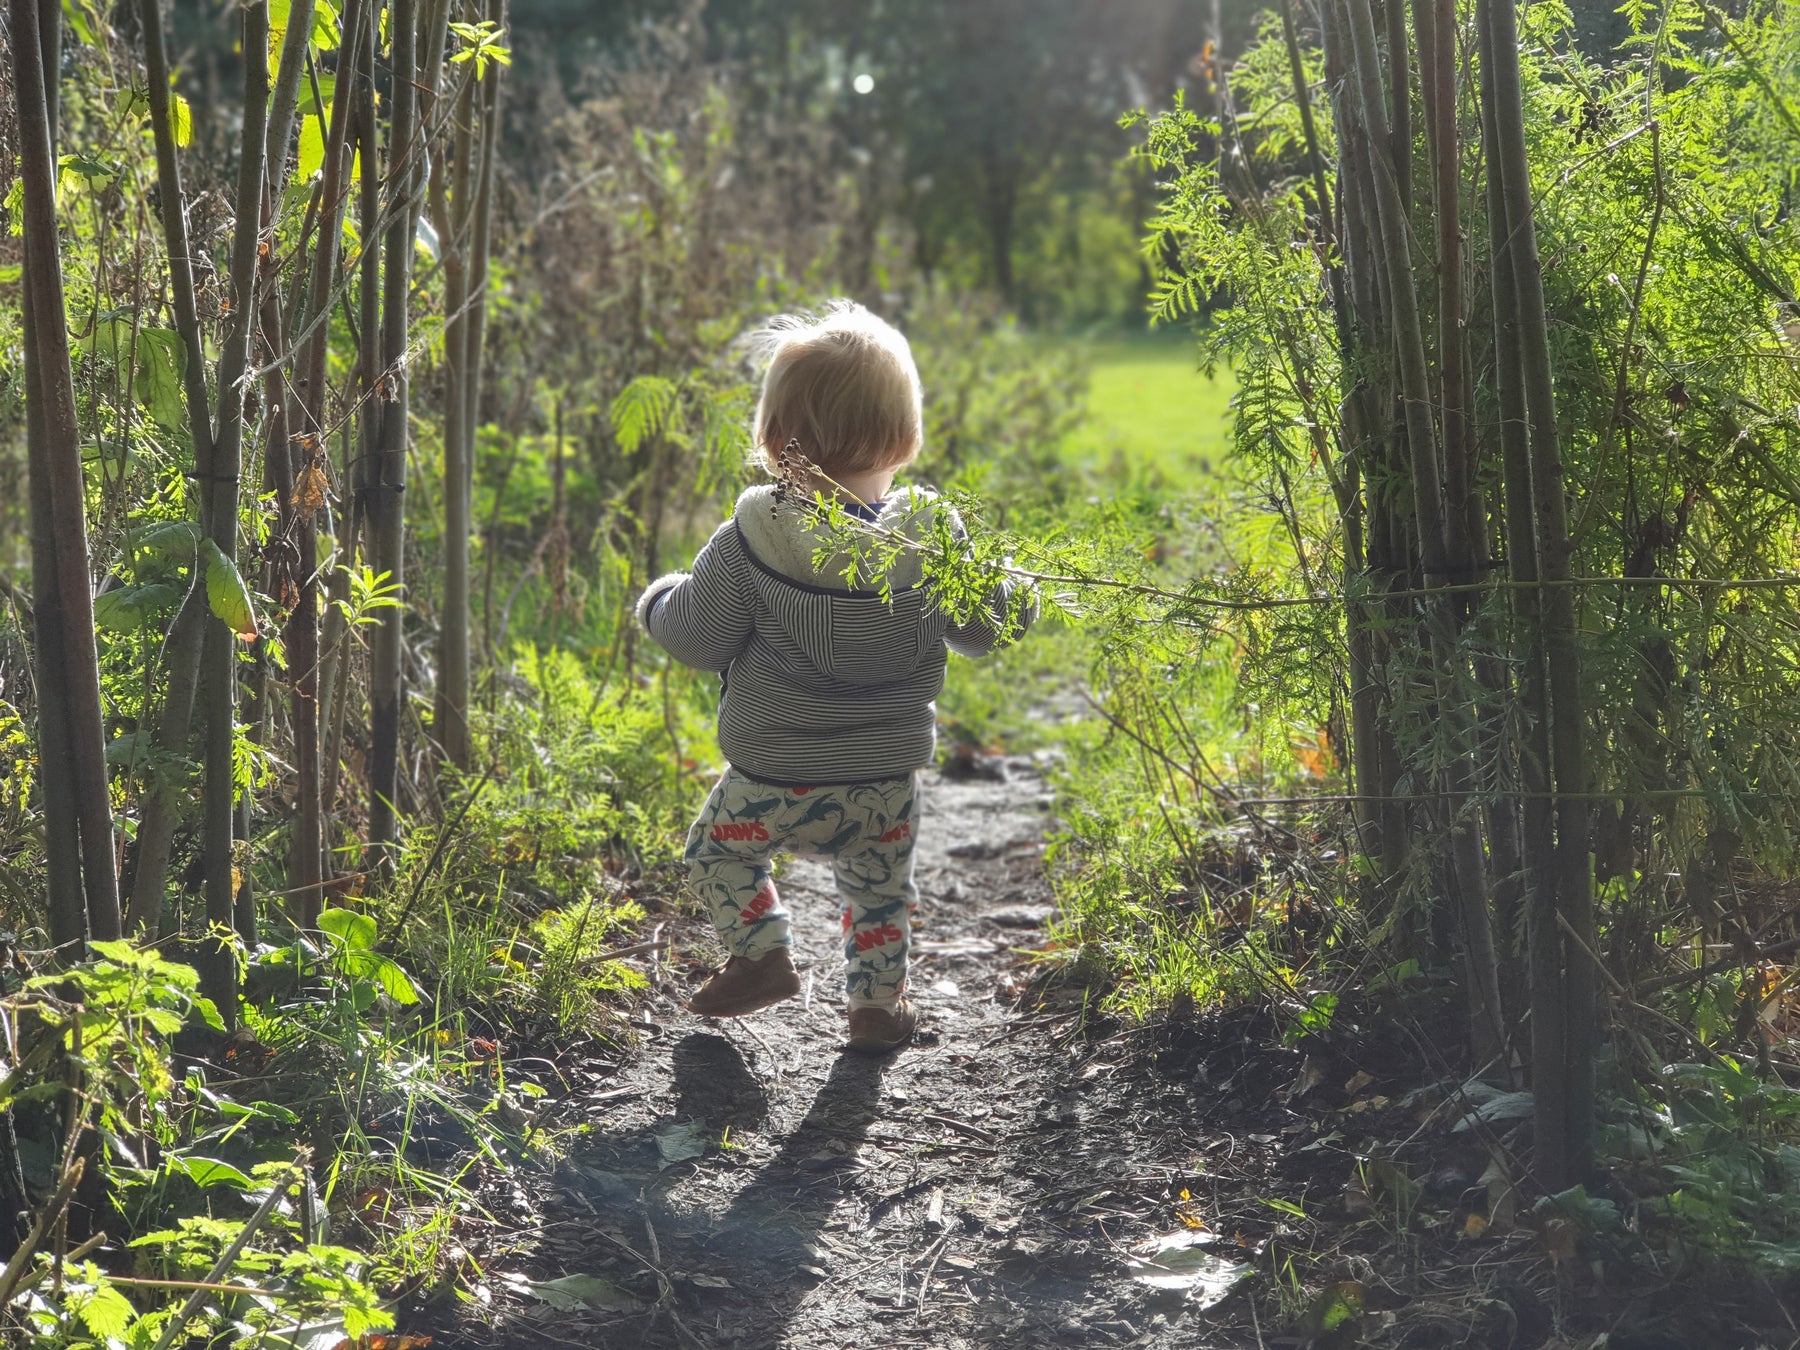 Child exploring nature wearing awesome second-hand clothes